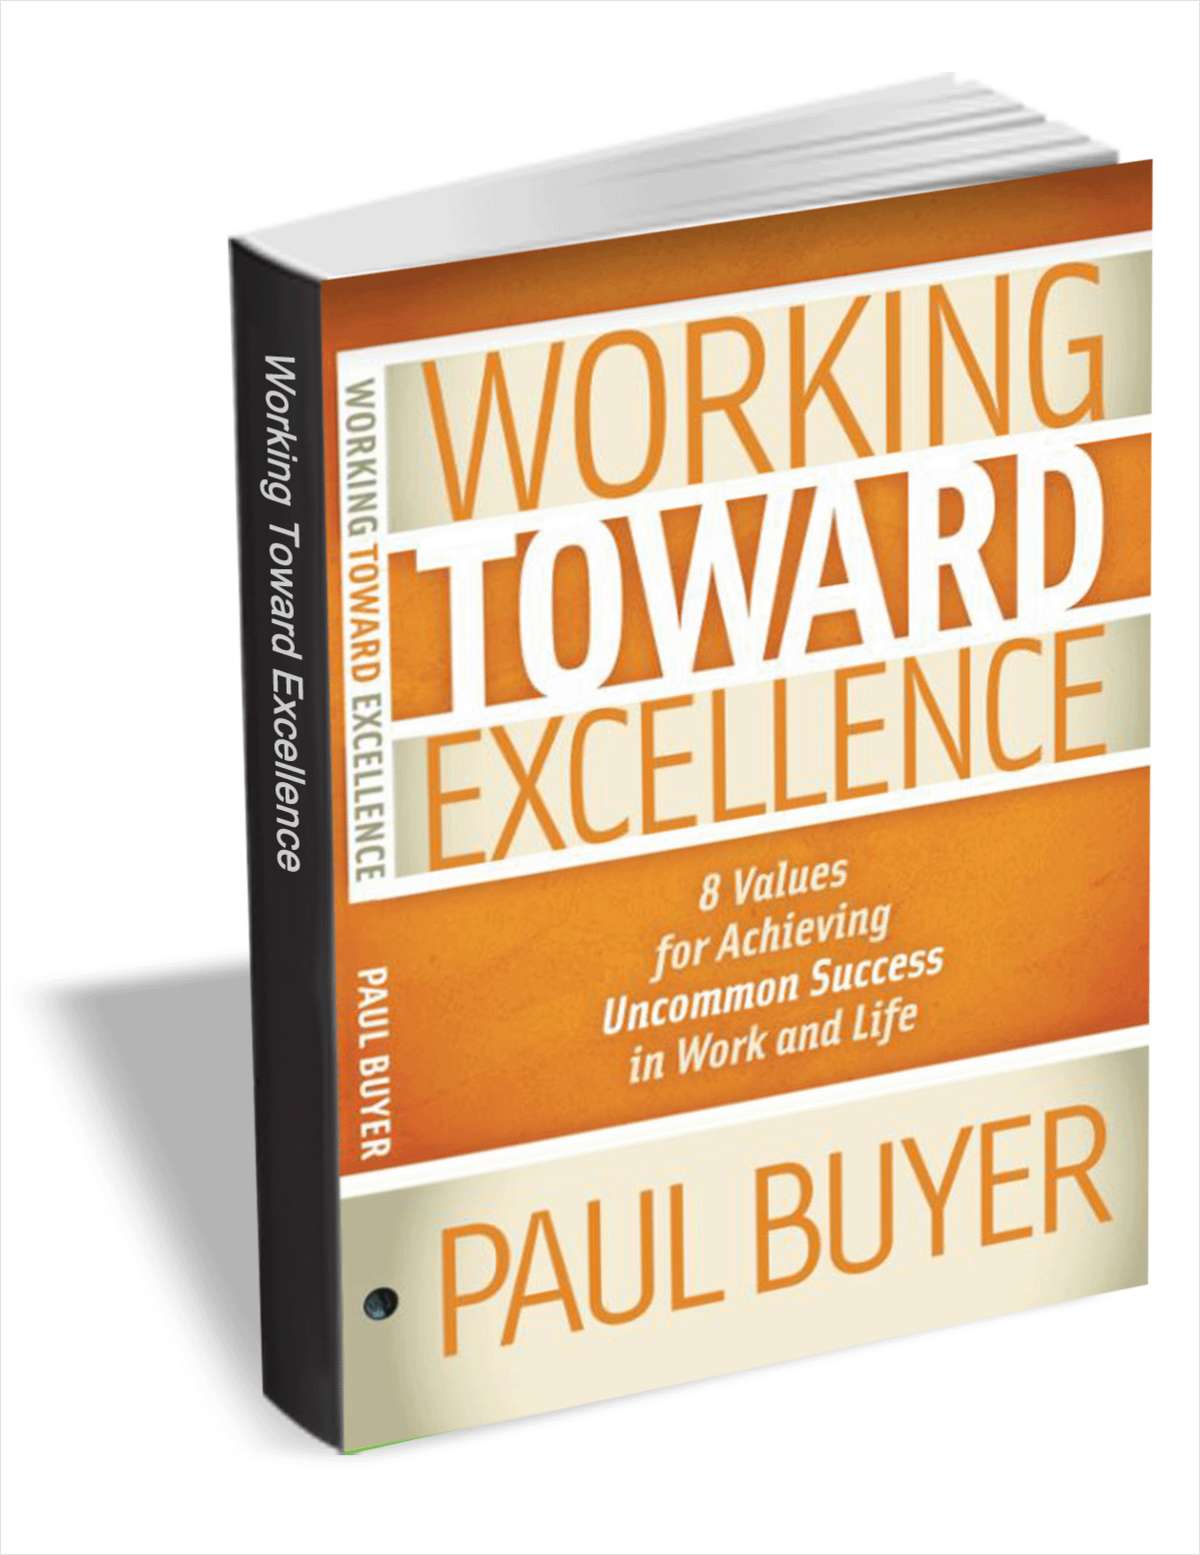 Working Toward Excellence: 8 Values for Achieving Uncommon Success in Work and Life (Valued at $7.99) FREE!